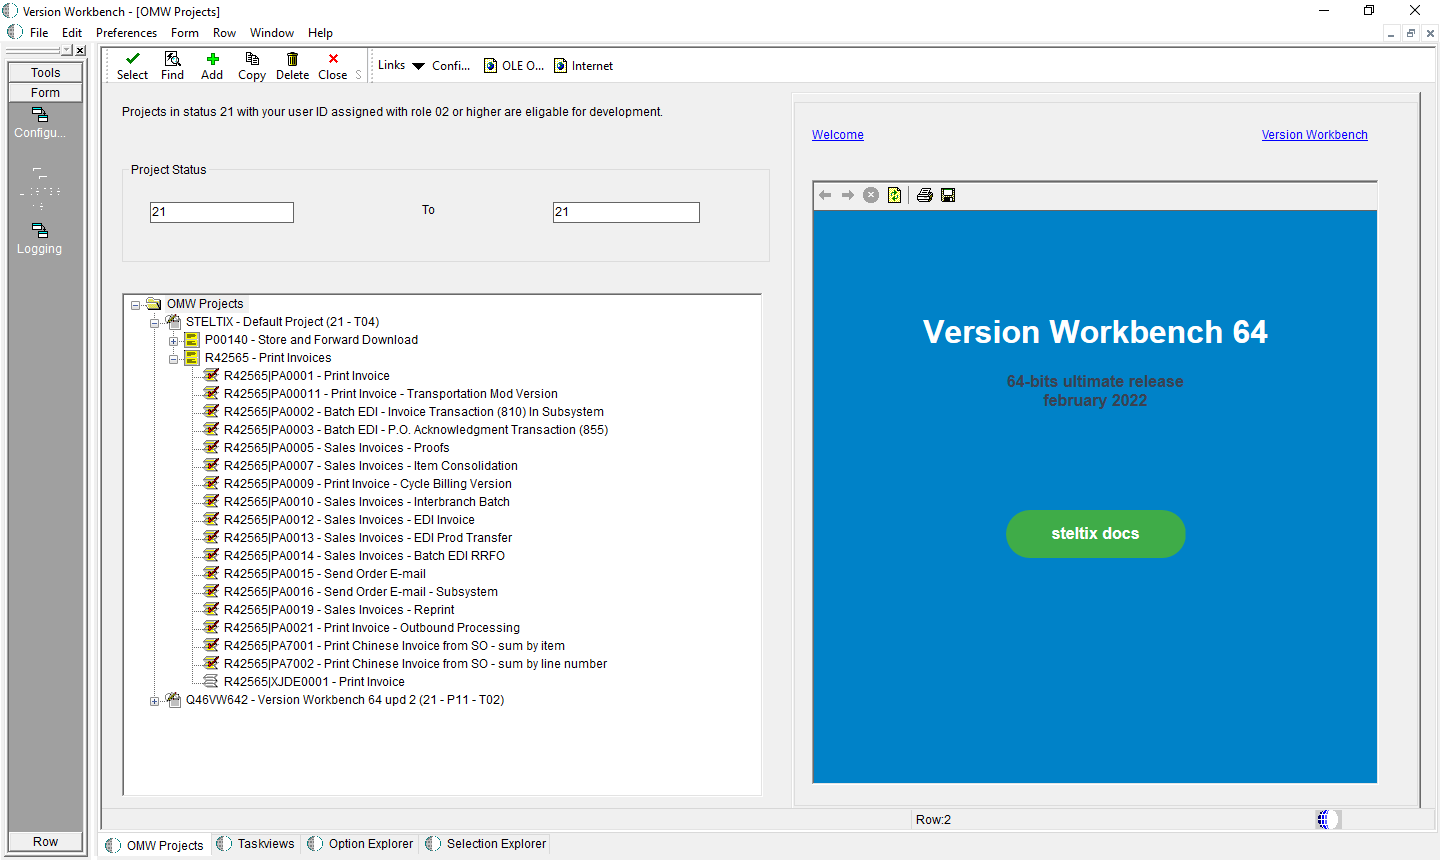 Version Workbench introduction screen